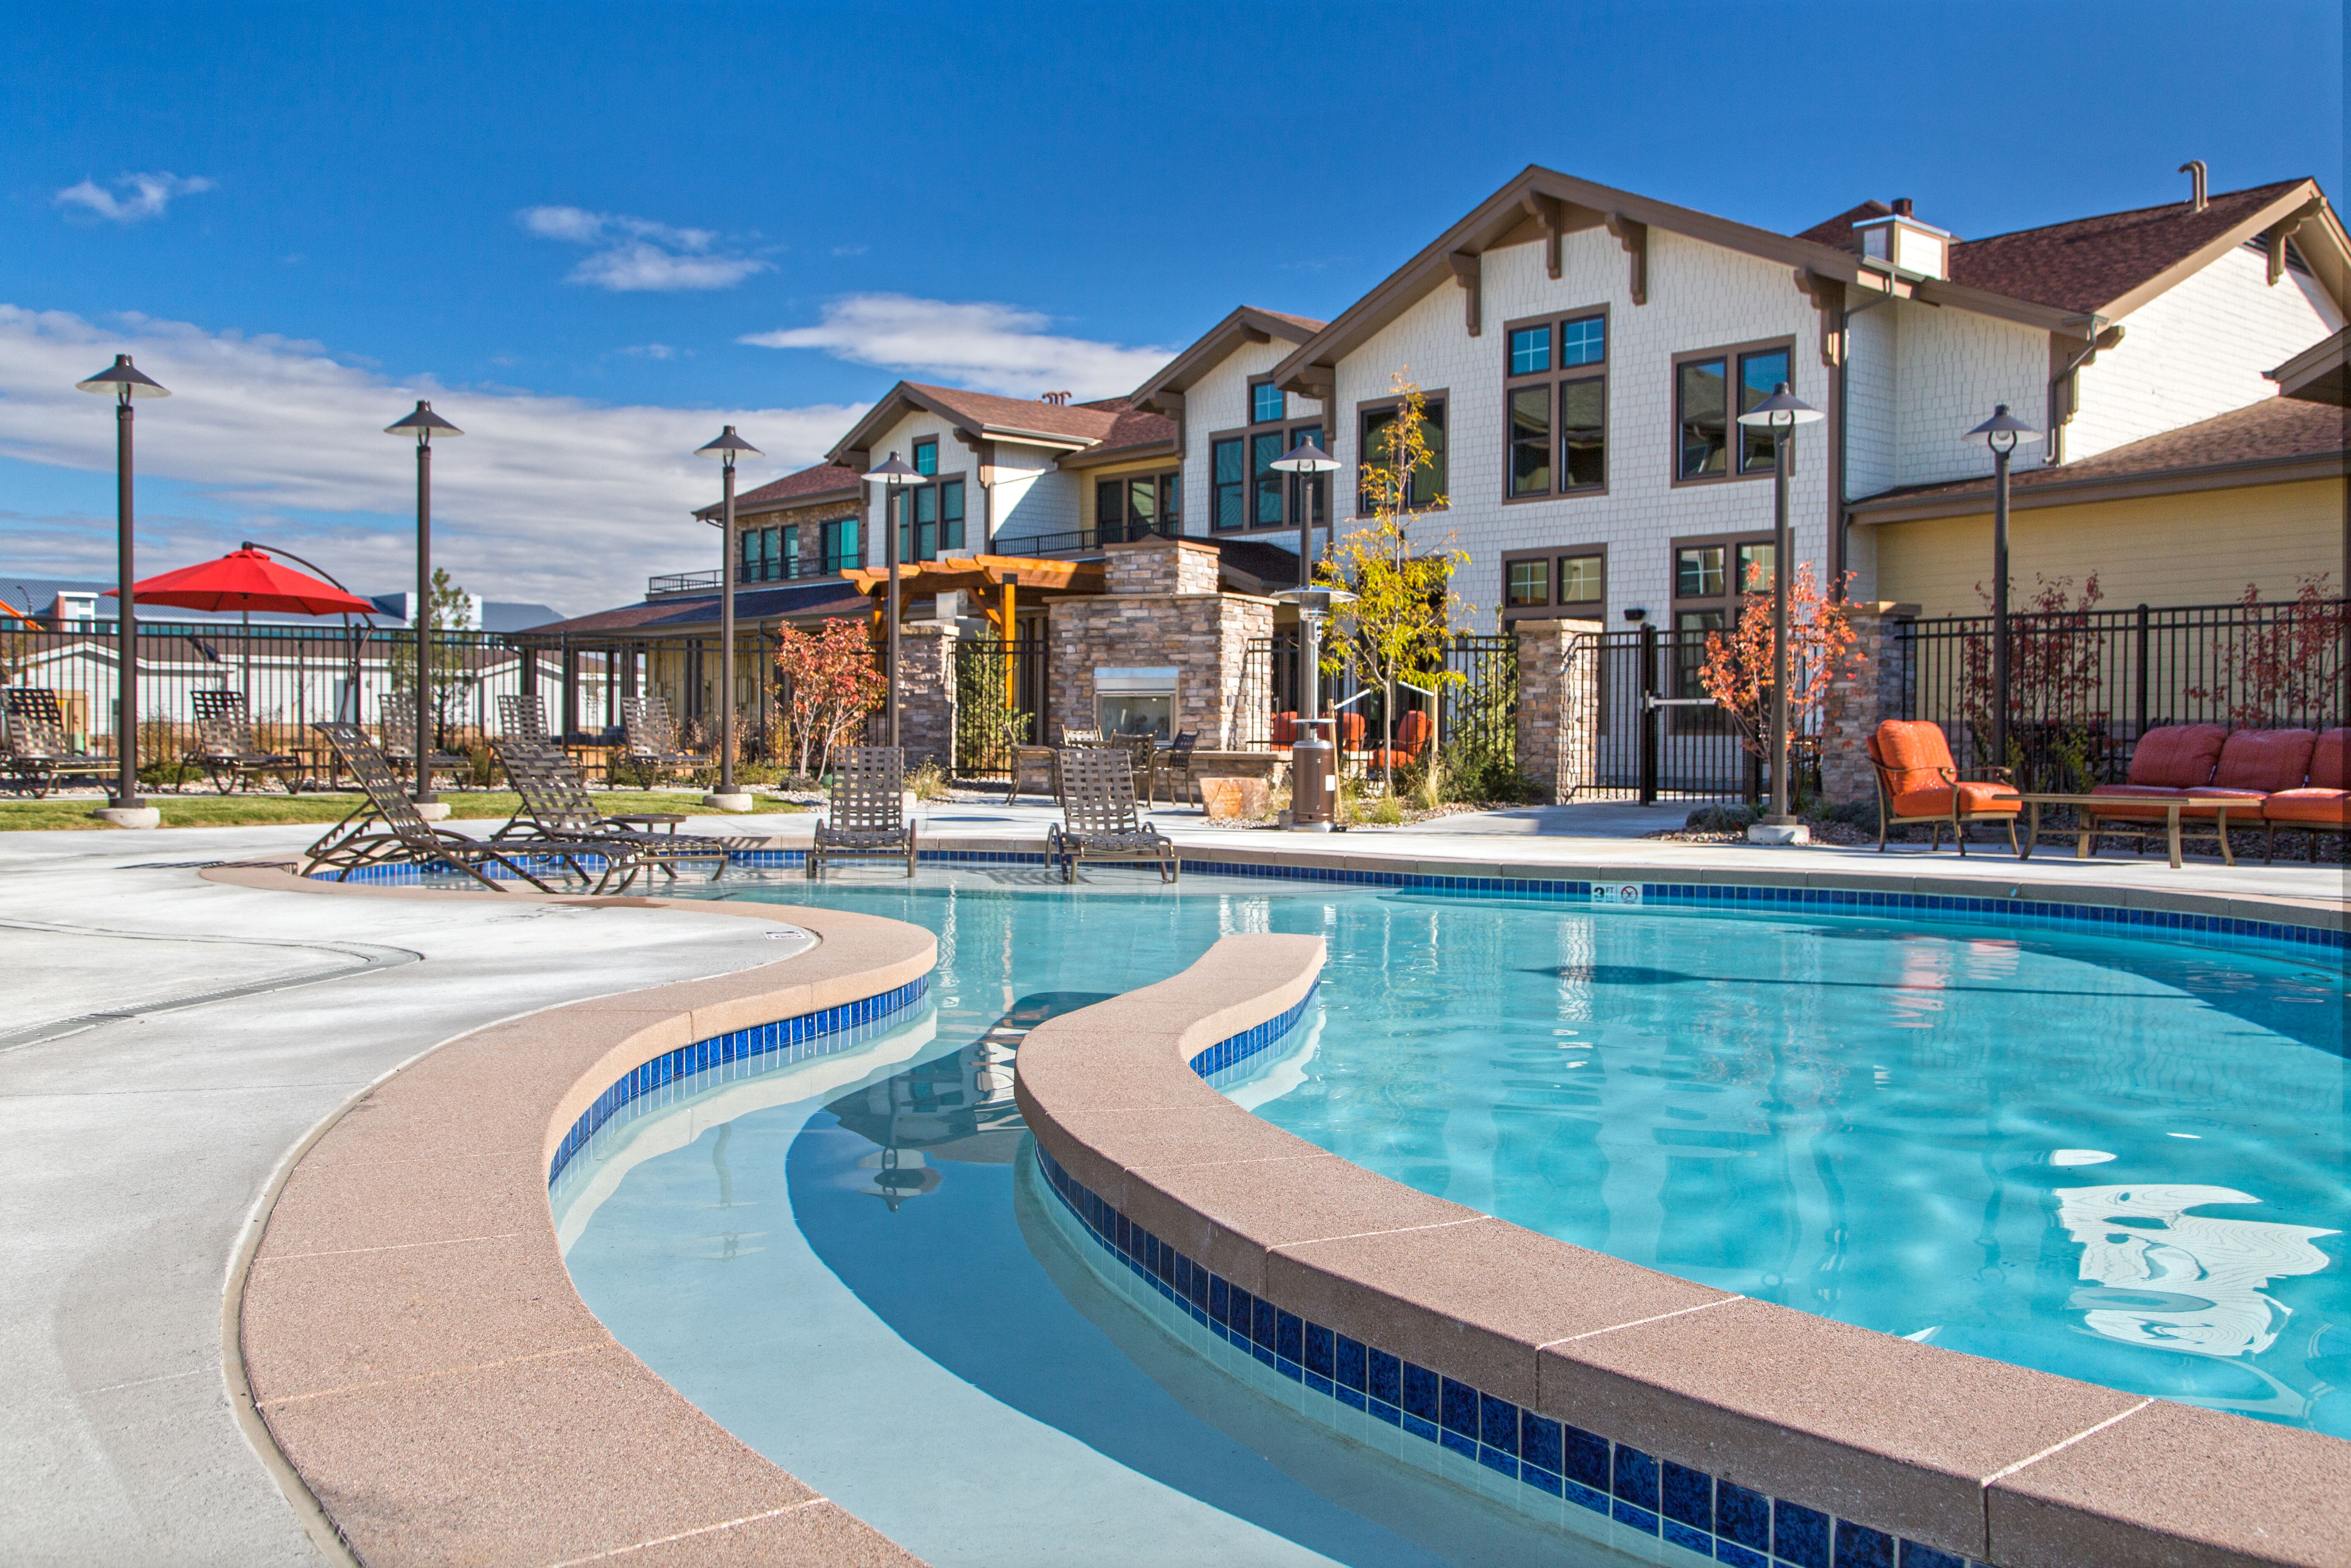 pool at the trails at timberline apartments, a multifamily development in fort collins, co